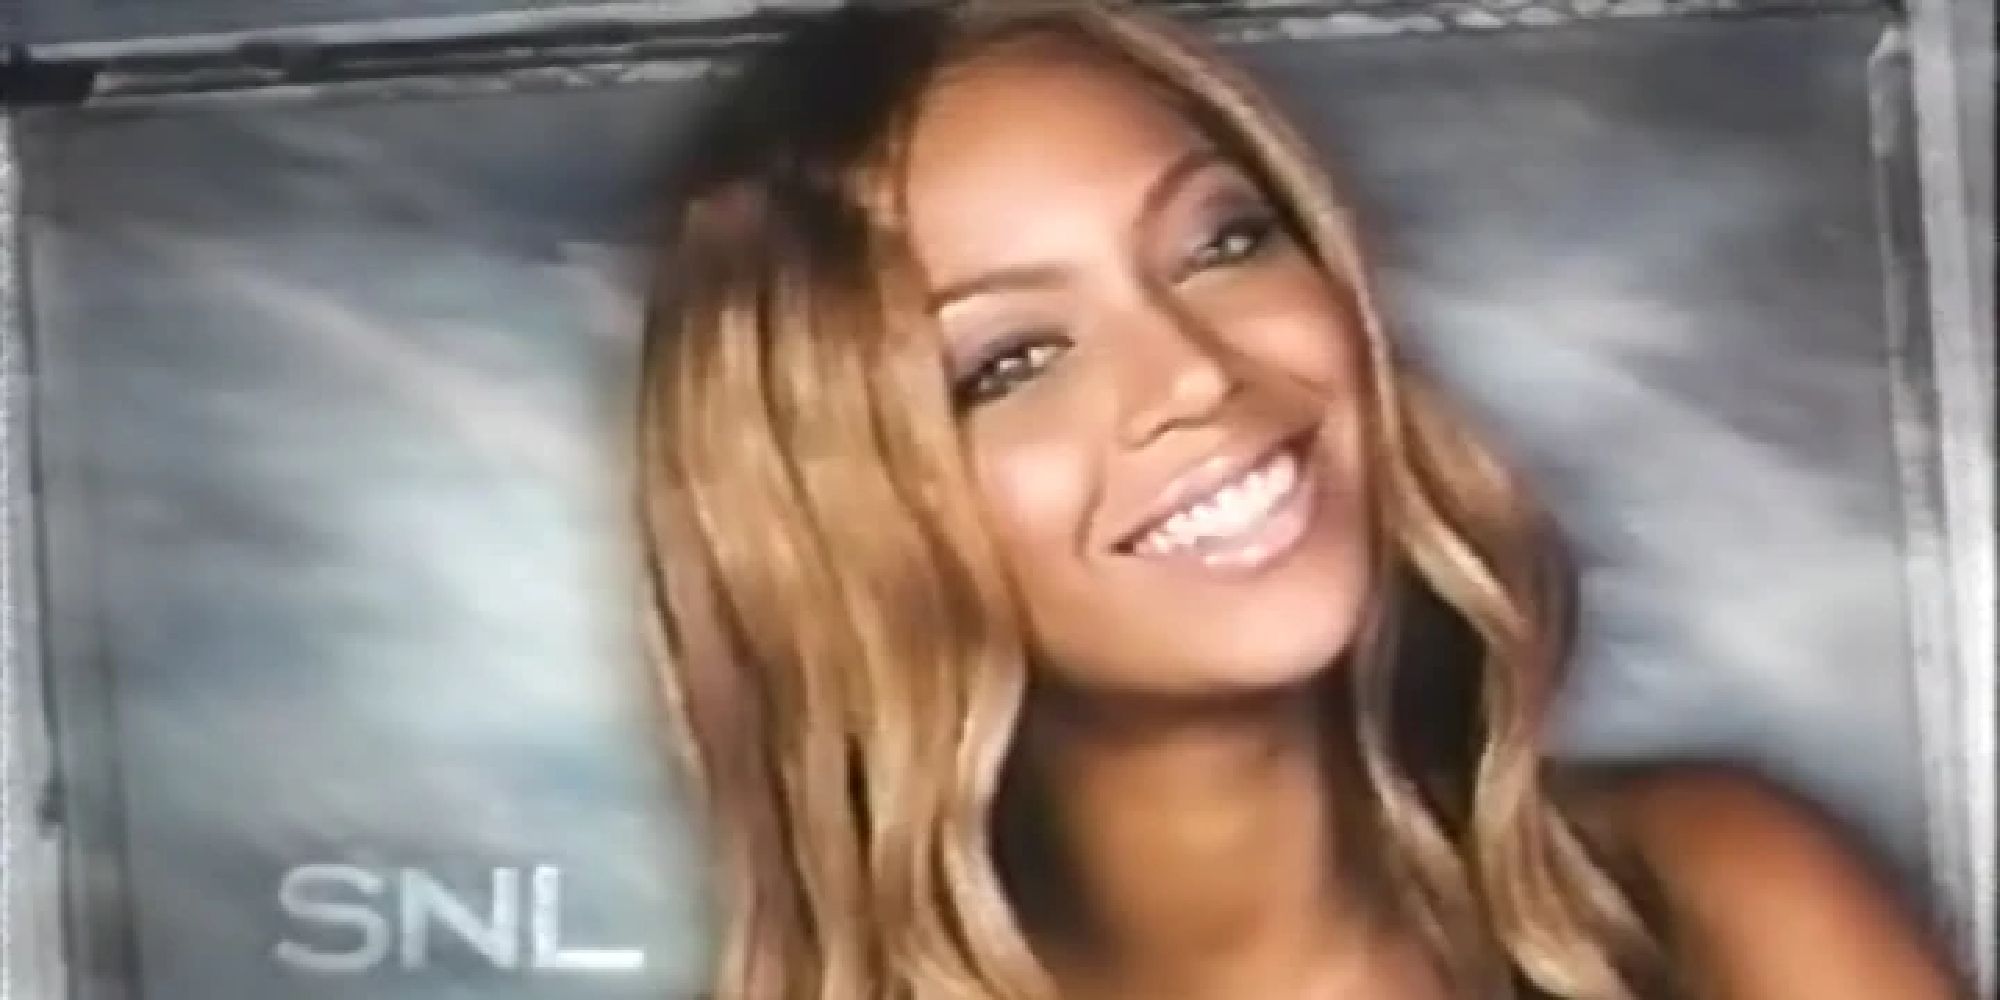 Beyonce on an SNL title card in 2003